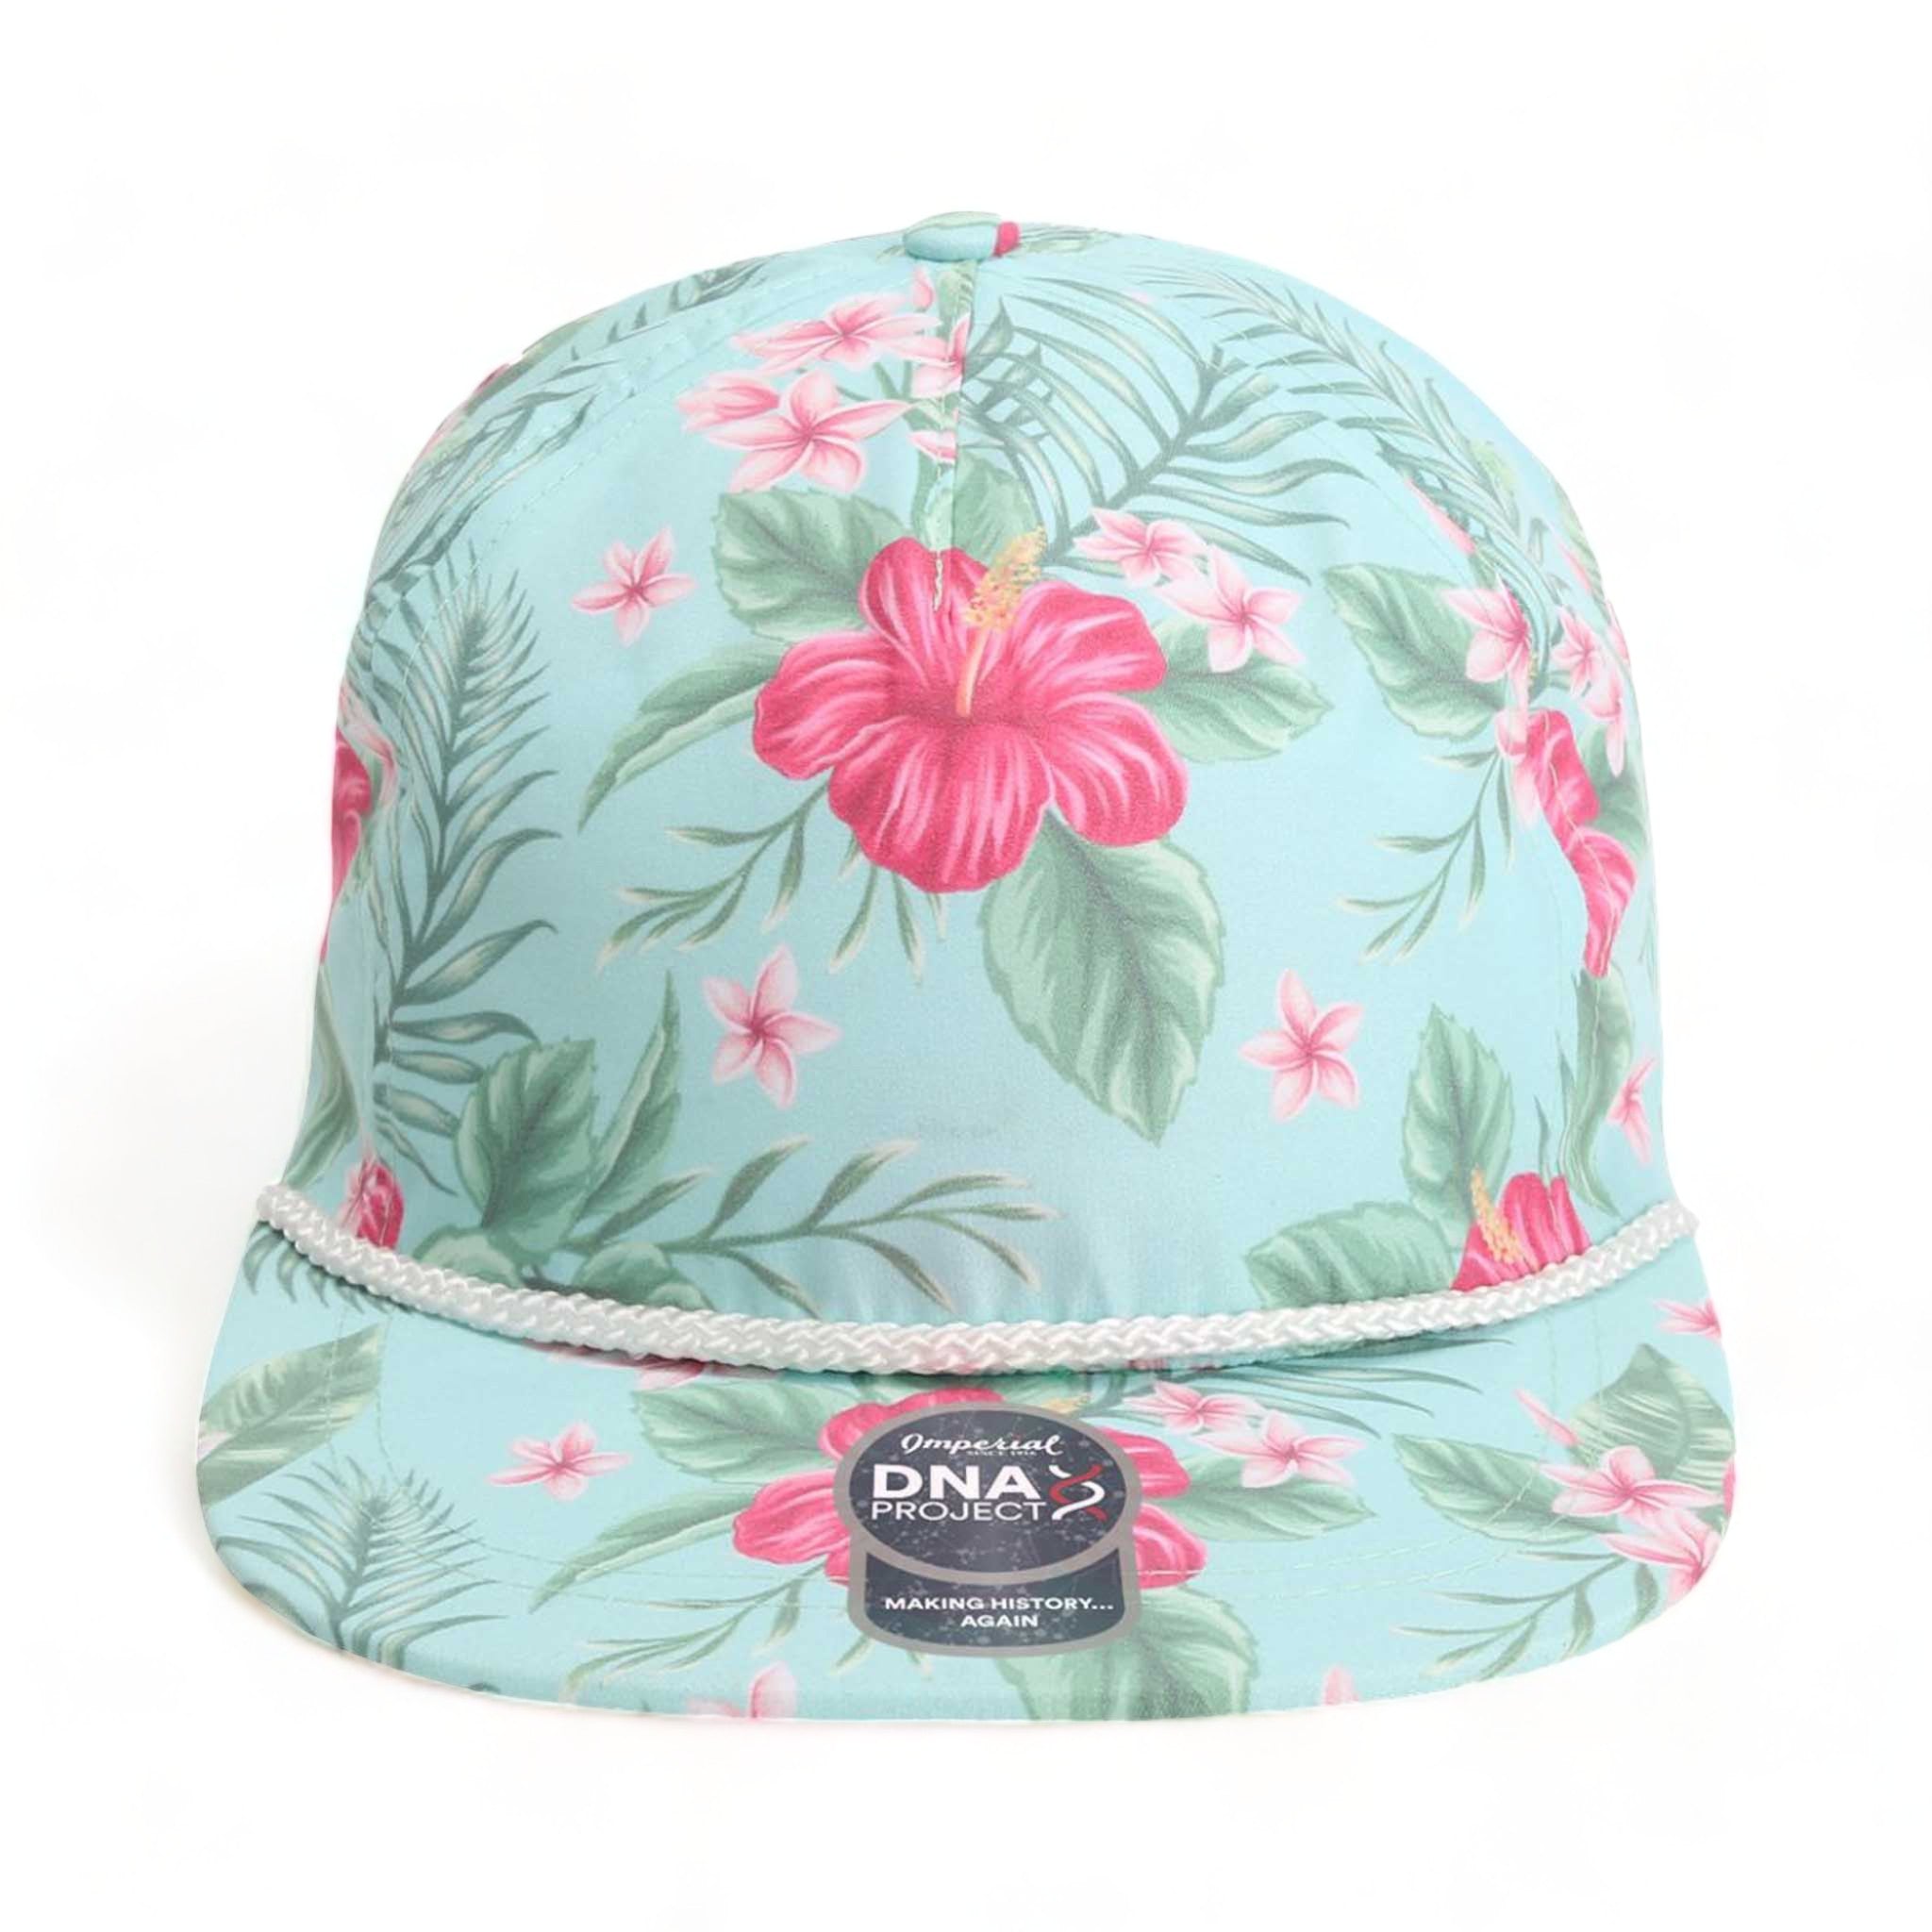 Front view of Imperial DNA010 custom hat in hawai'in biome